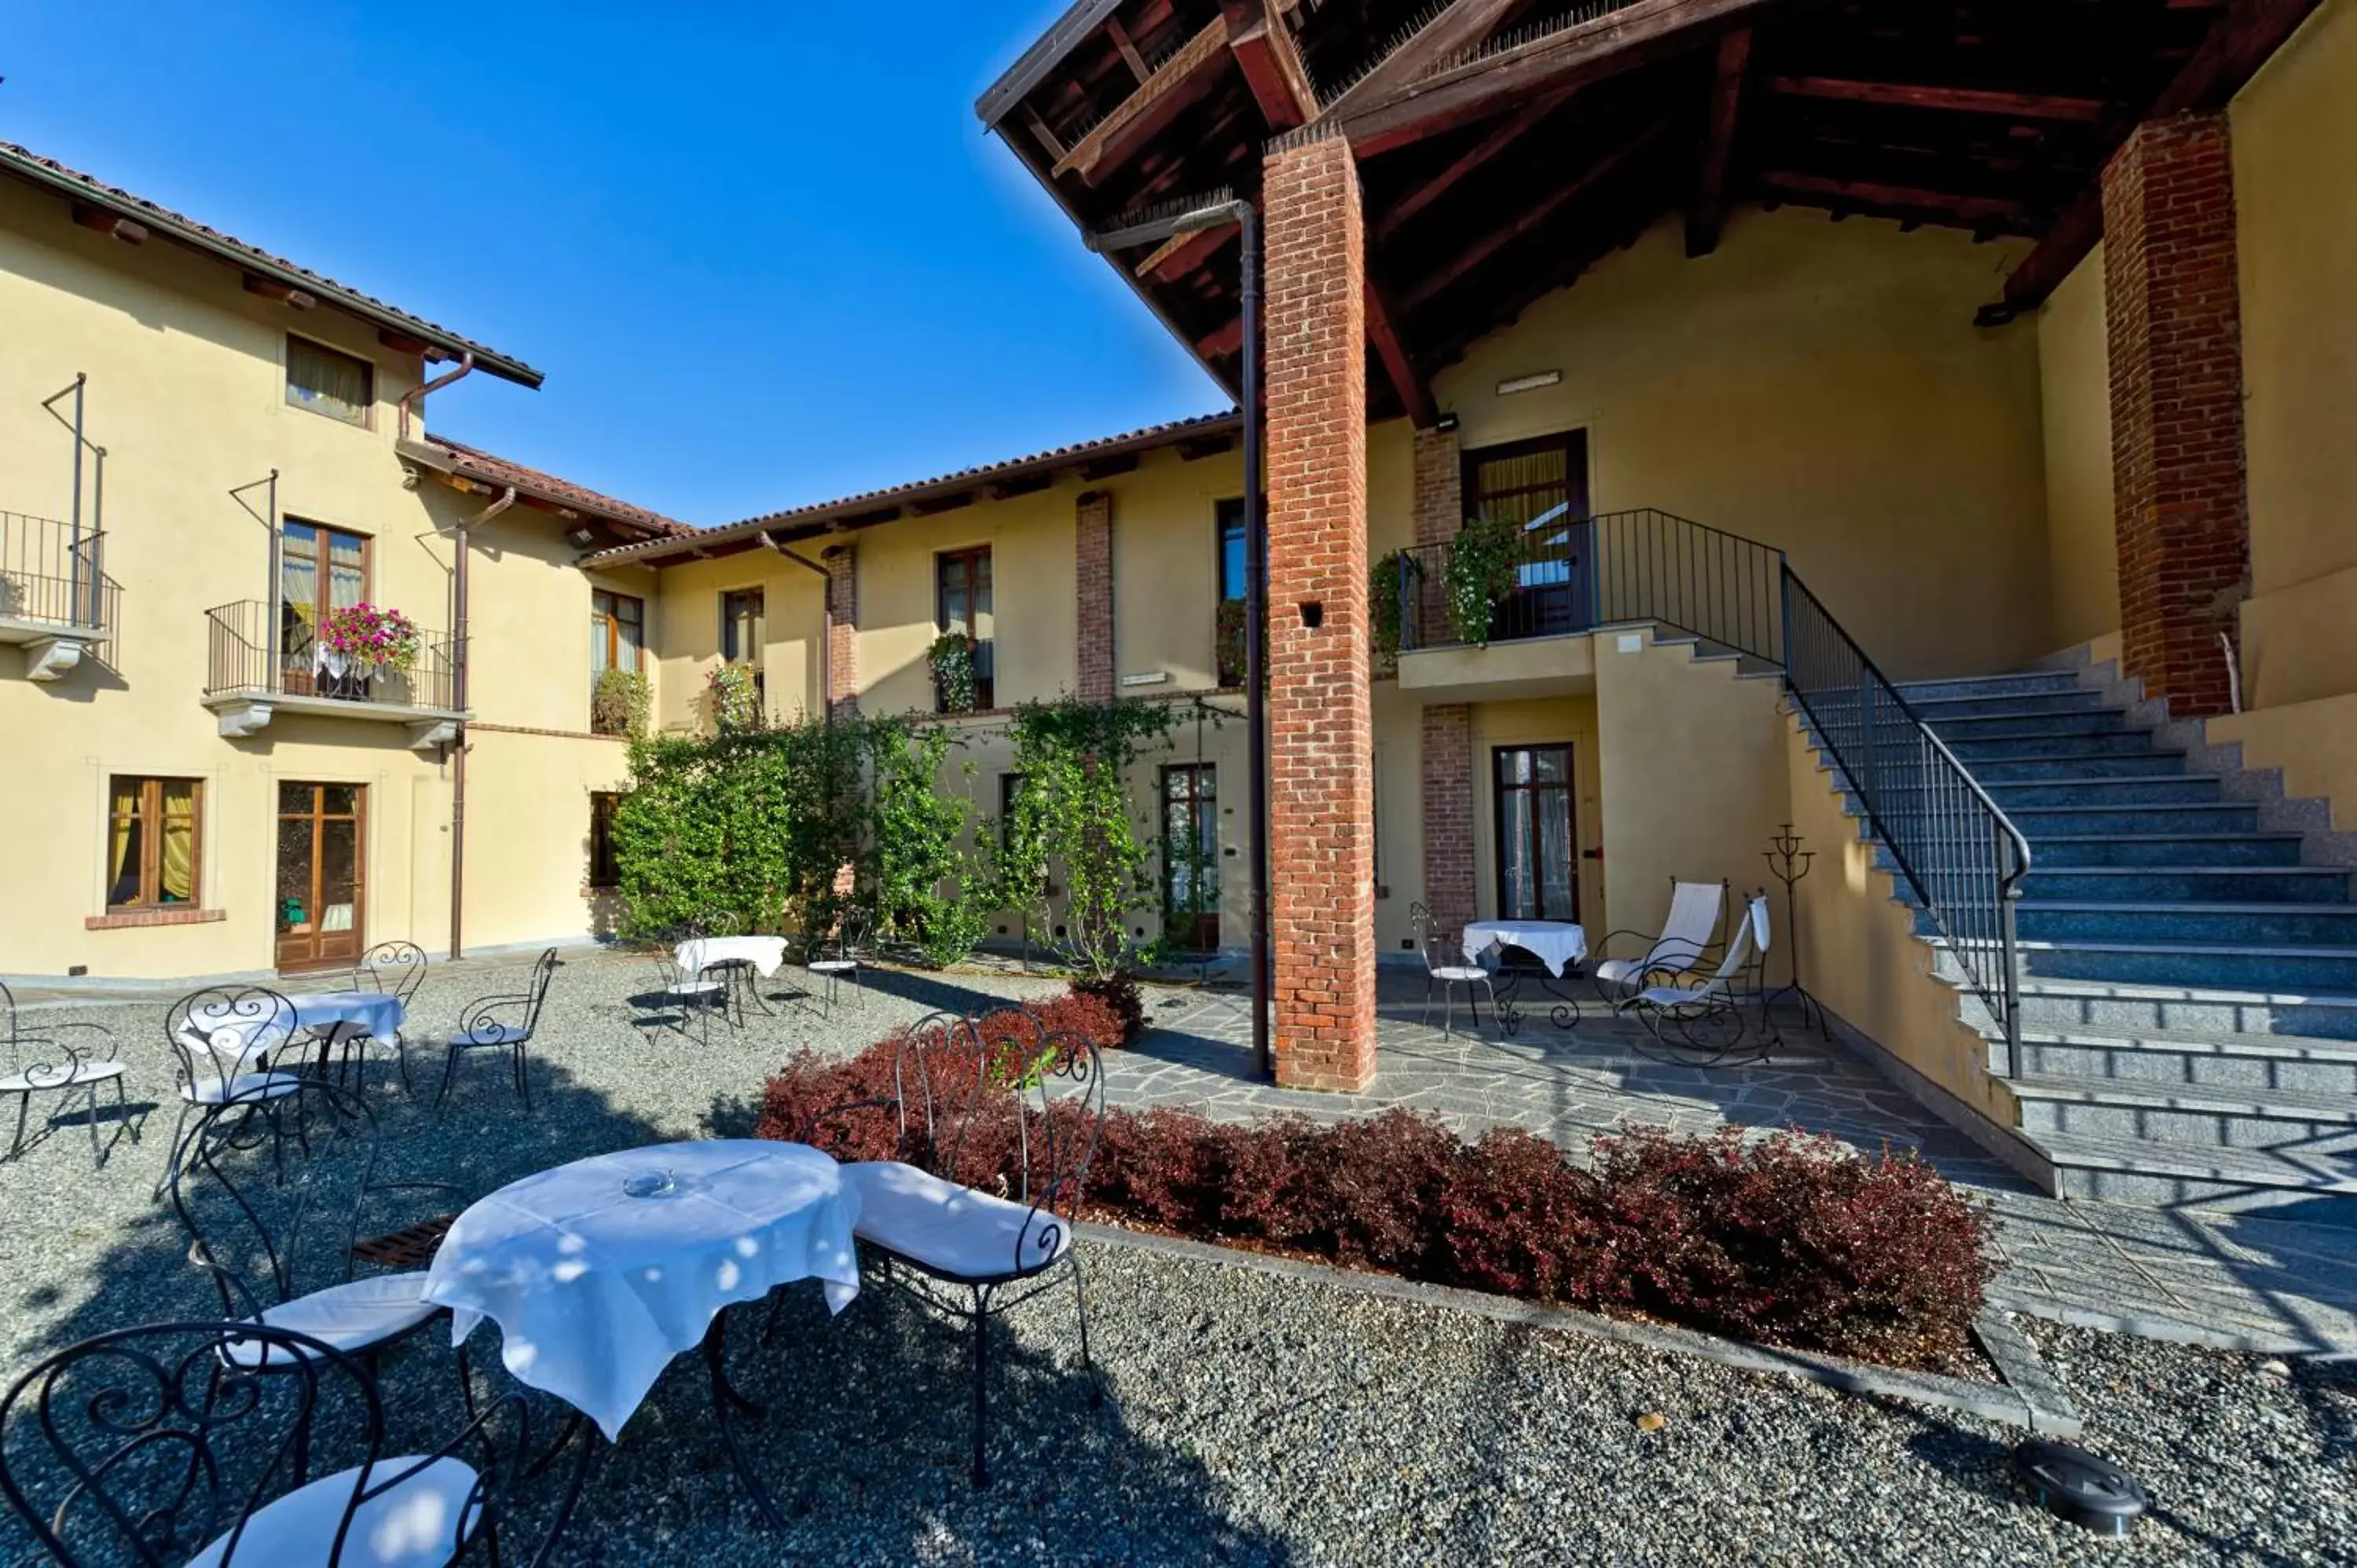 Patio, Property Building in Best Western Plus Hotel Le Rondini